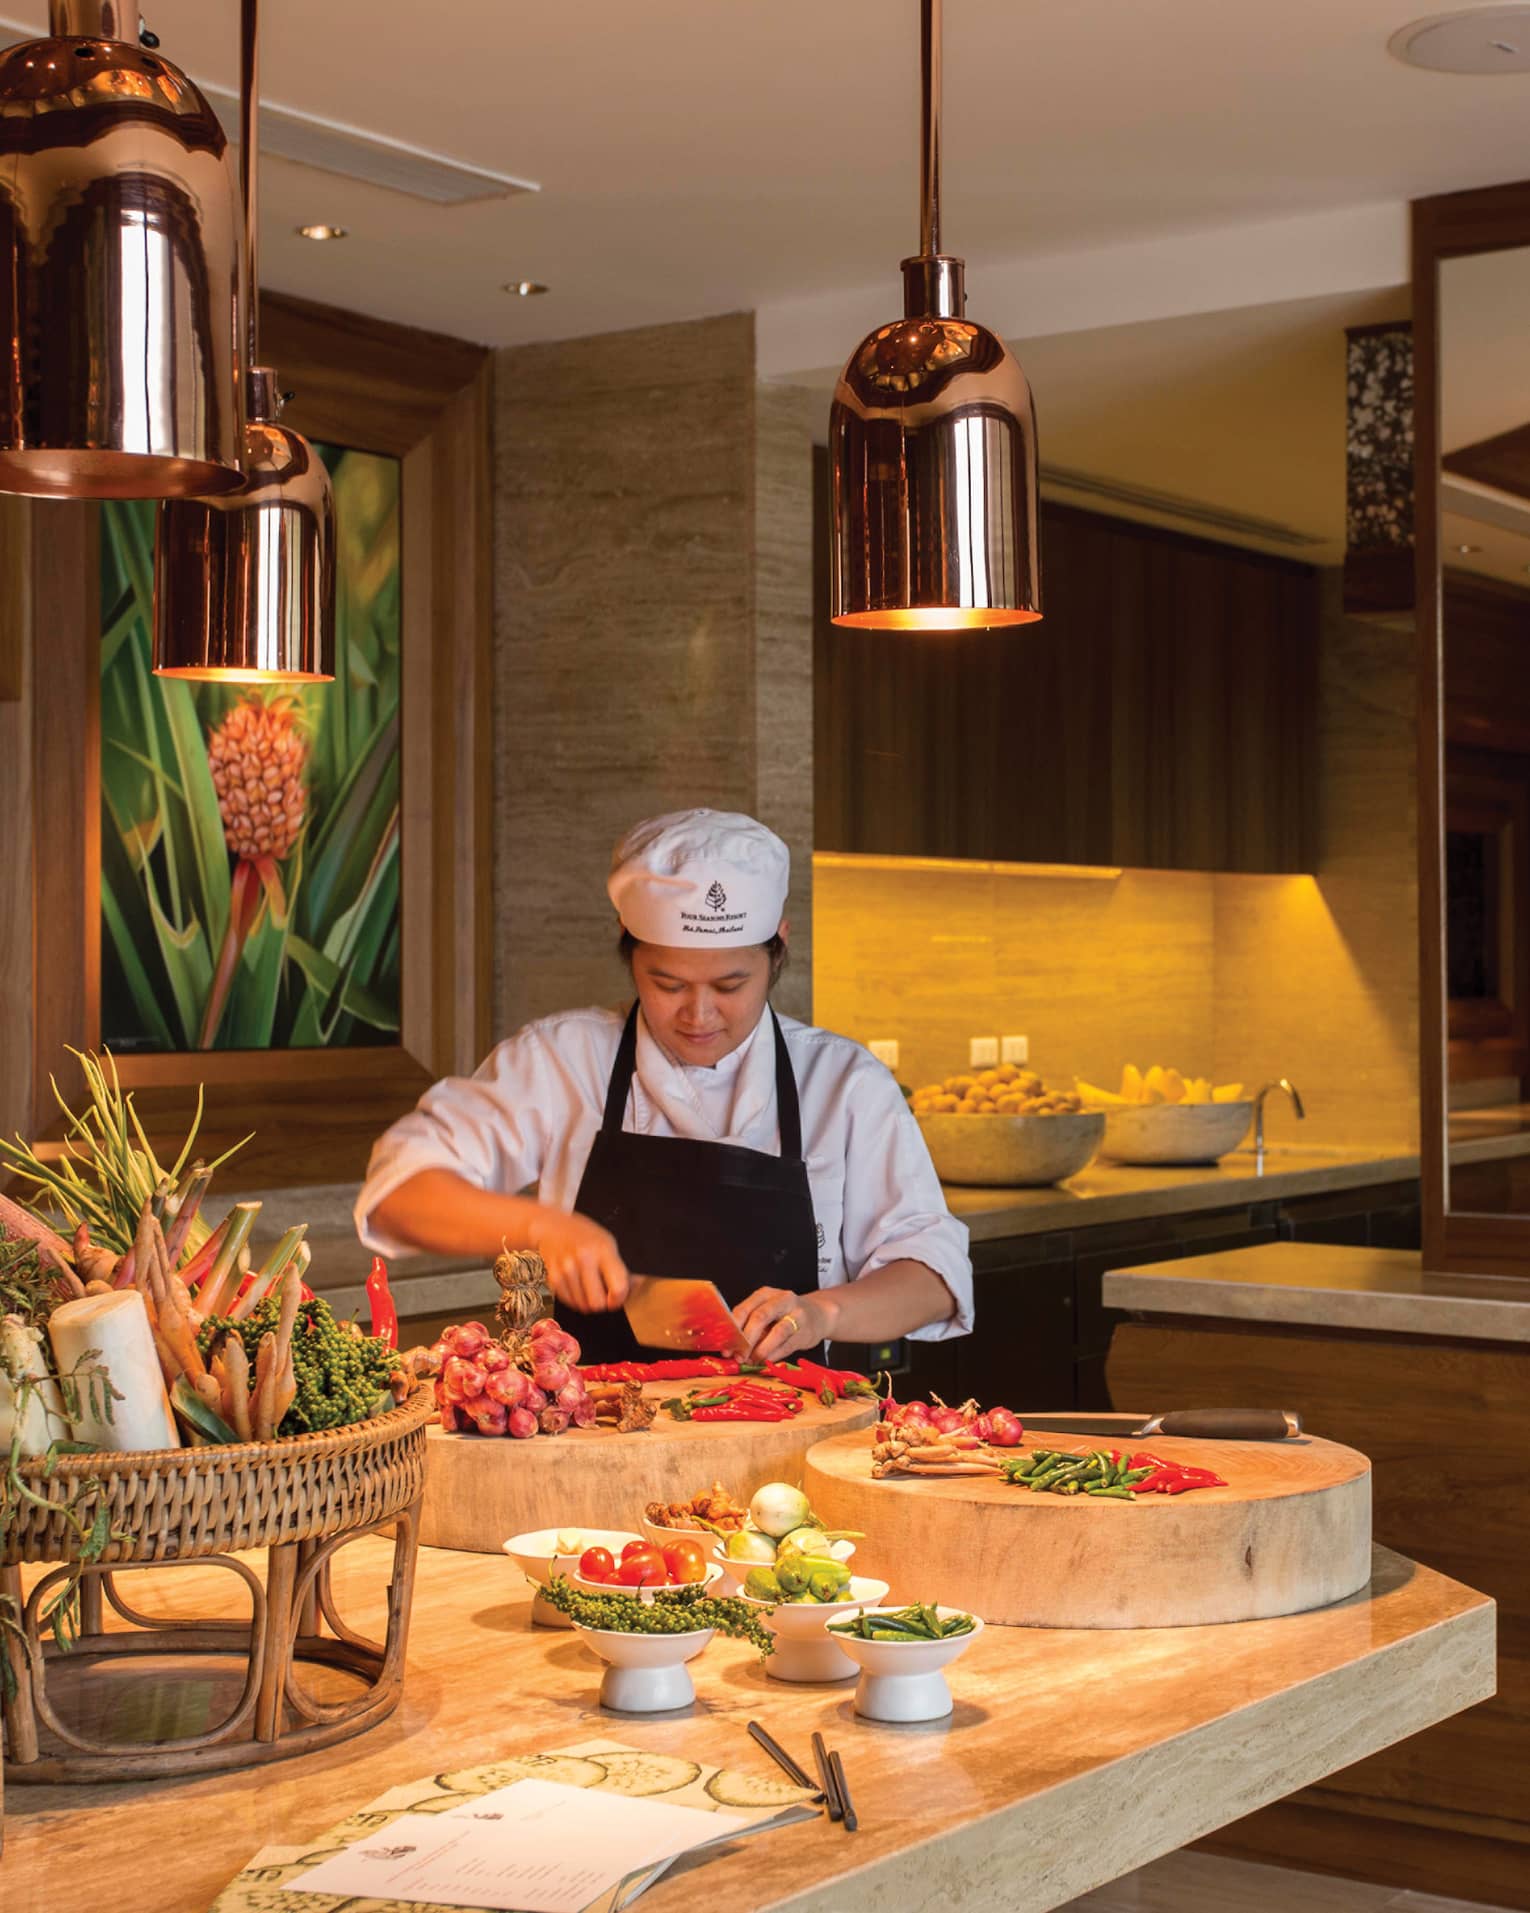 A chef chops vegetables on a large butcher block amid a vibrant array of fresh produce in a luxurious, warm-hued kitchen.